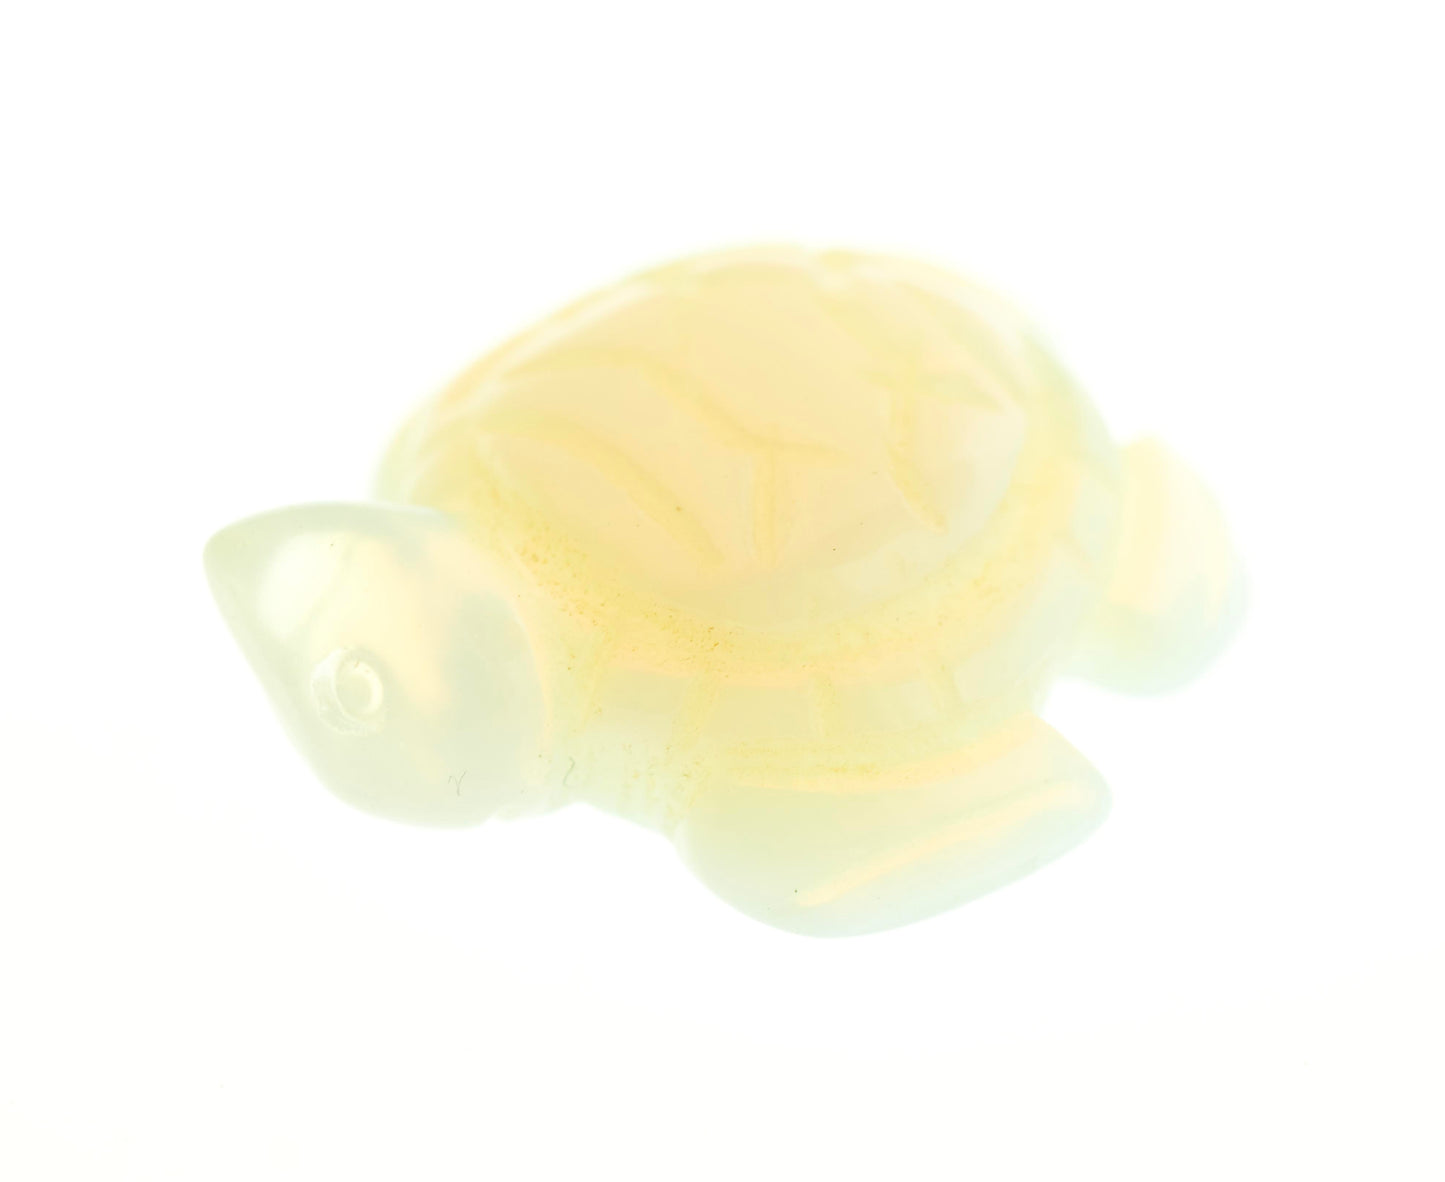 A small, translucent Carved Turtle Gemstone Figure resembling a turtle, displayed against a white background. The figure appears to be crafted from glossy aventurine or rose quartz.